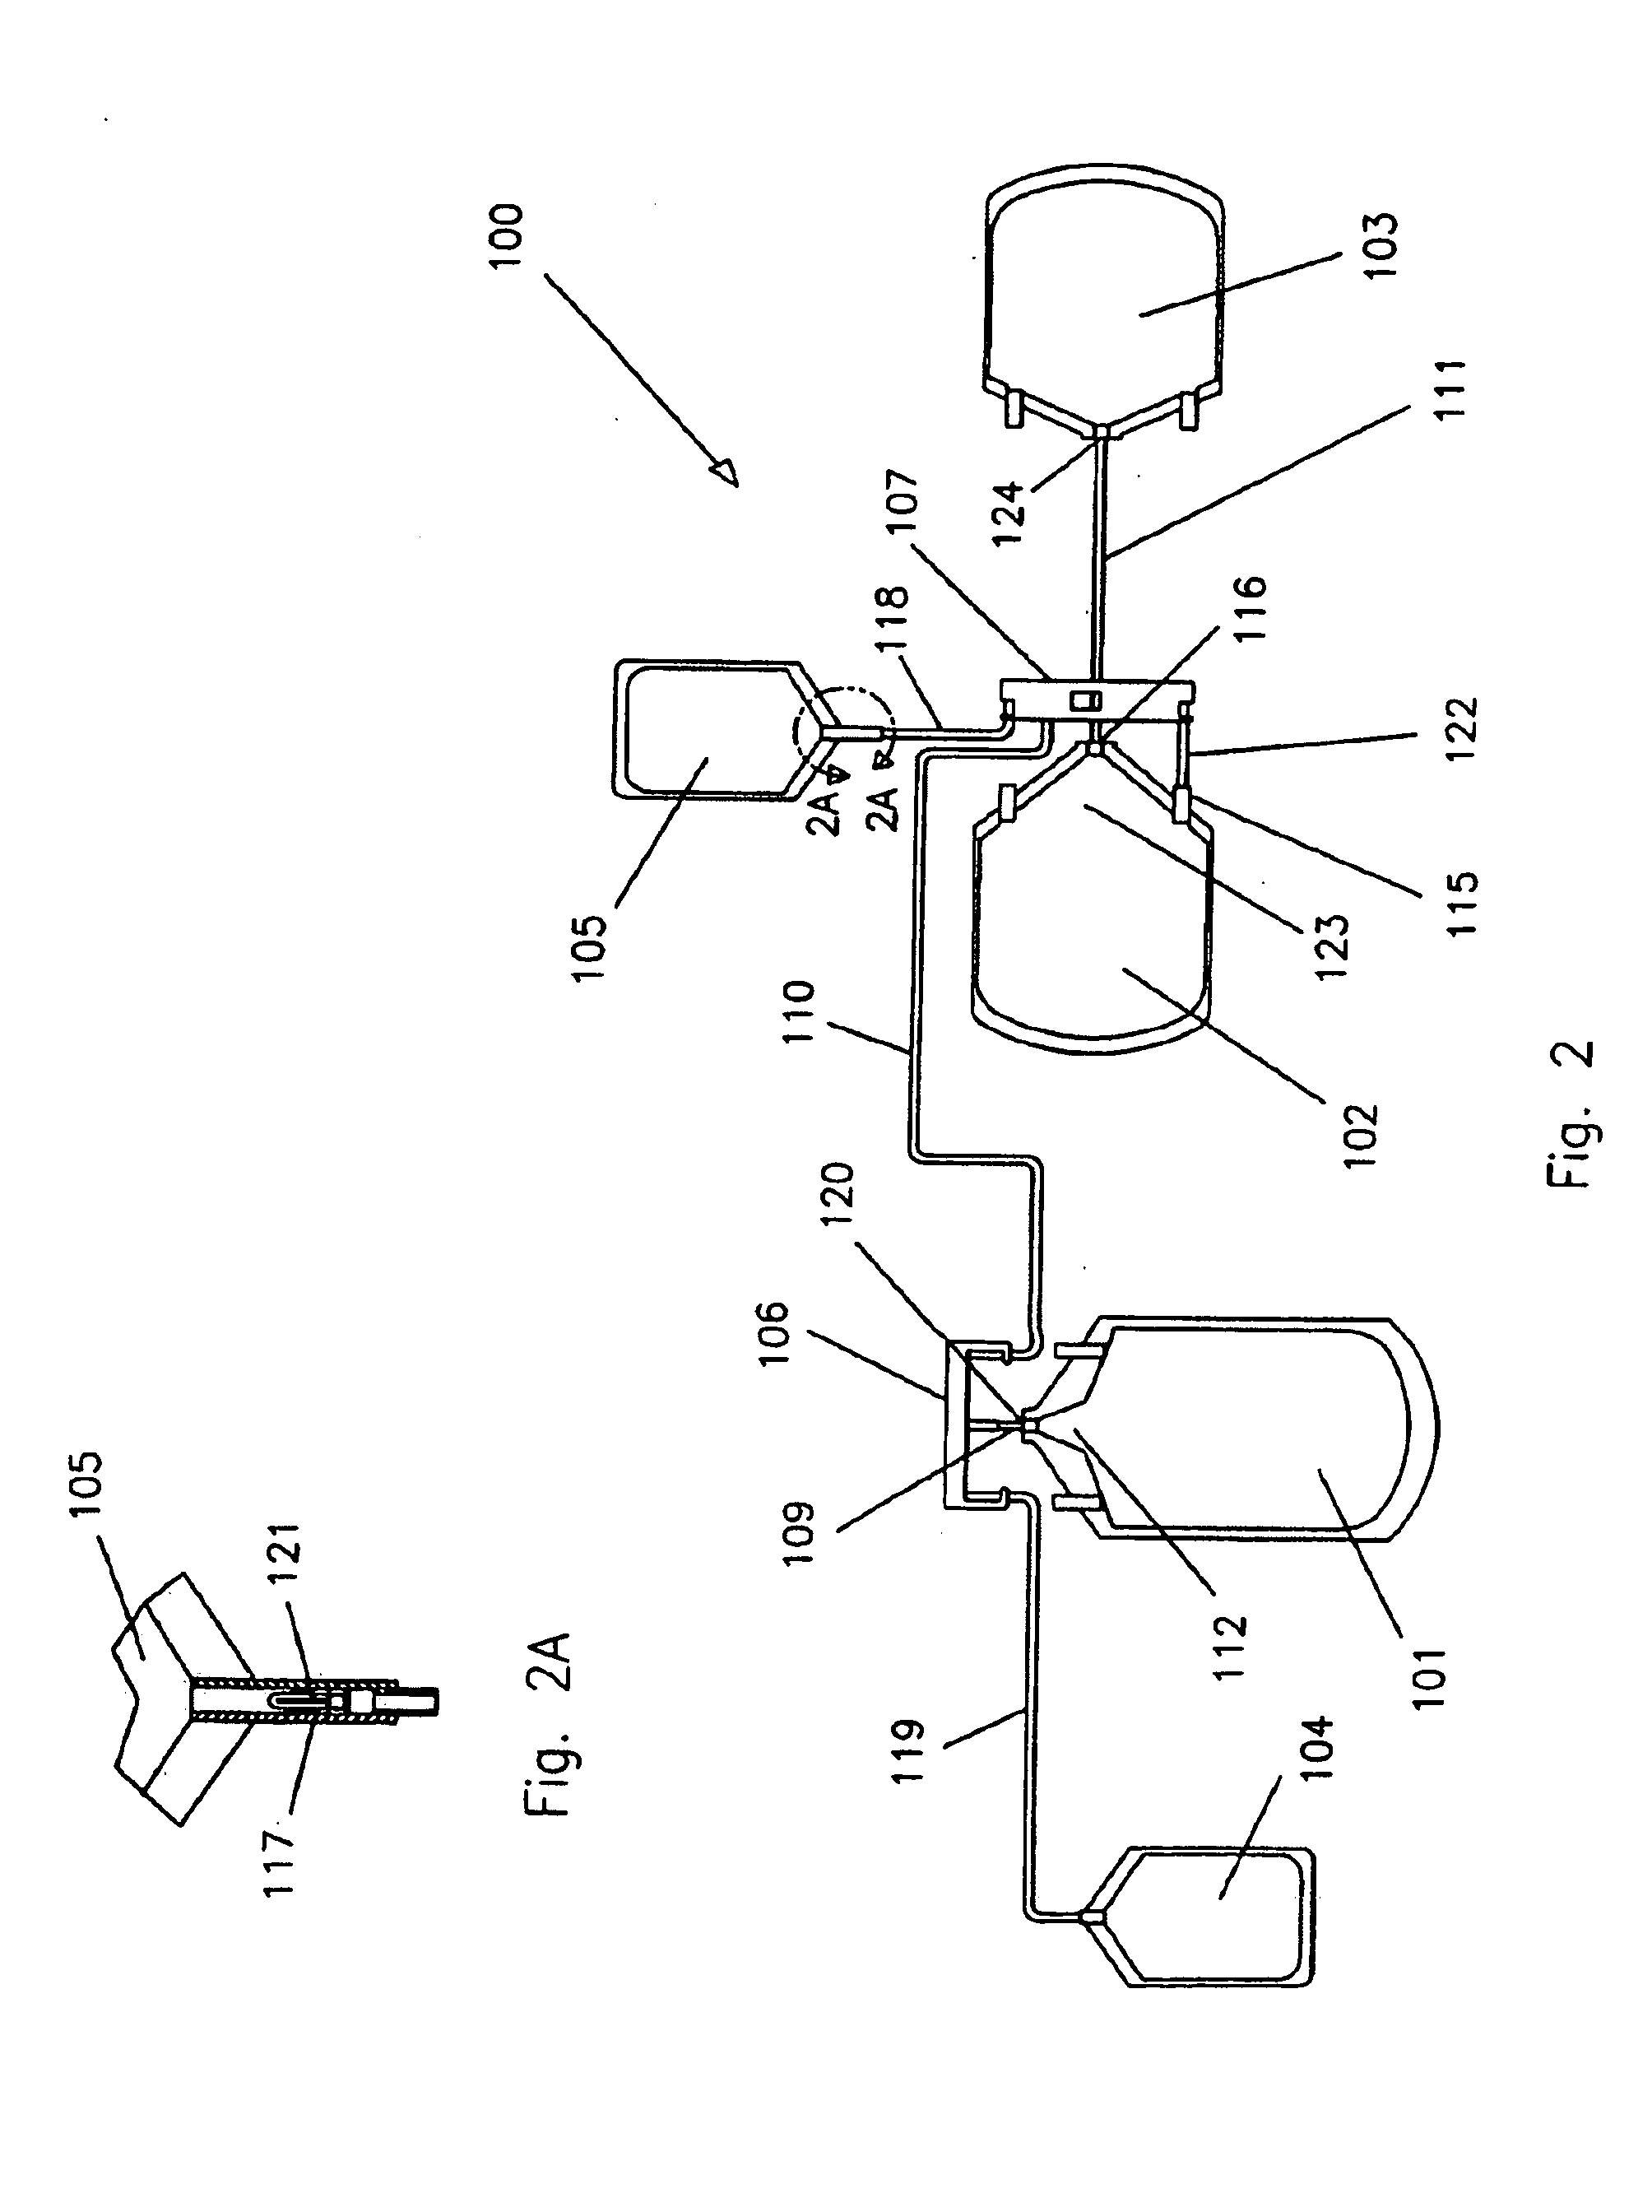 Automated system and method for blood components separation and processing